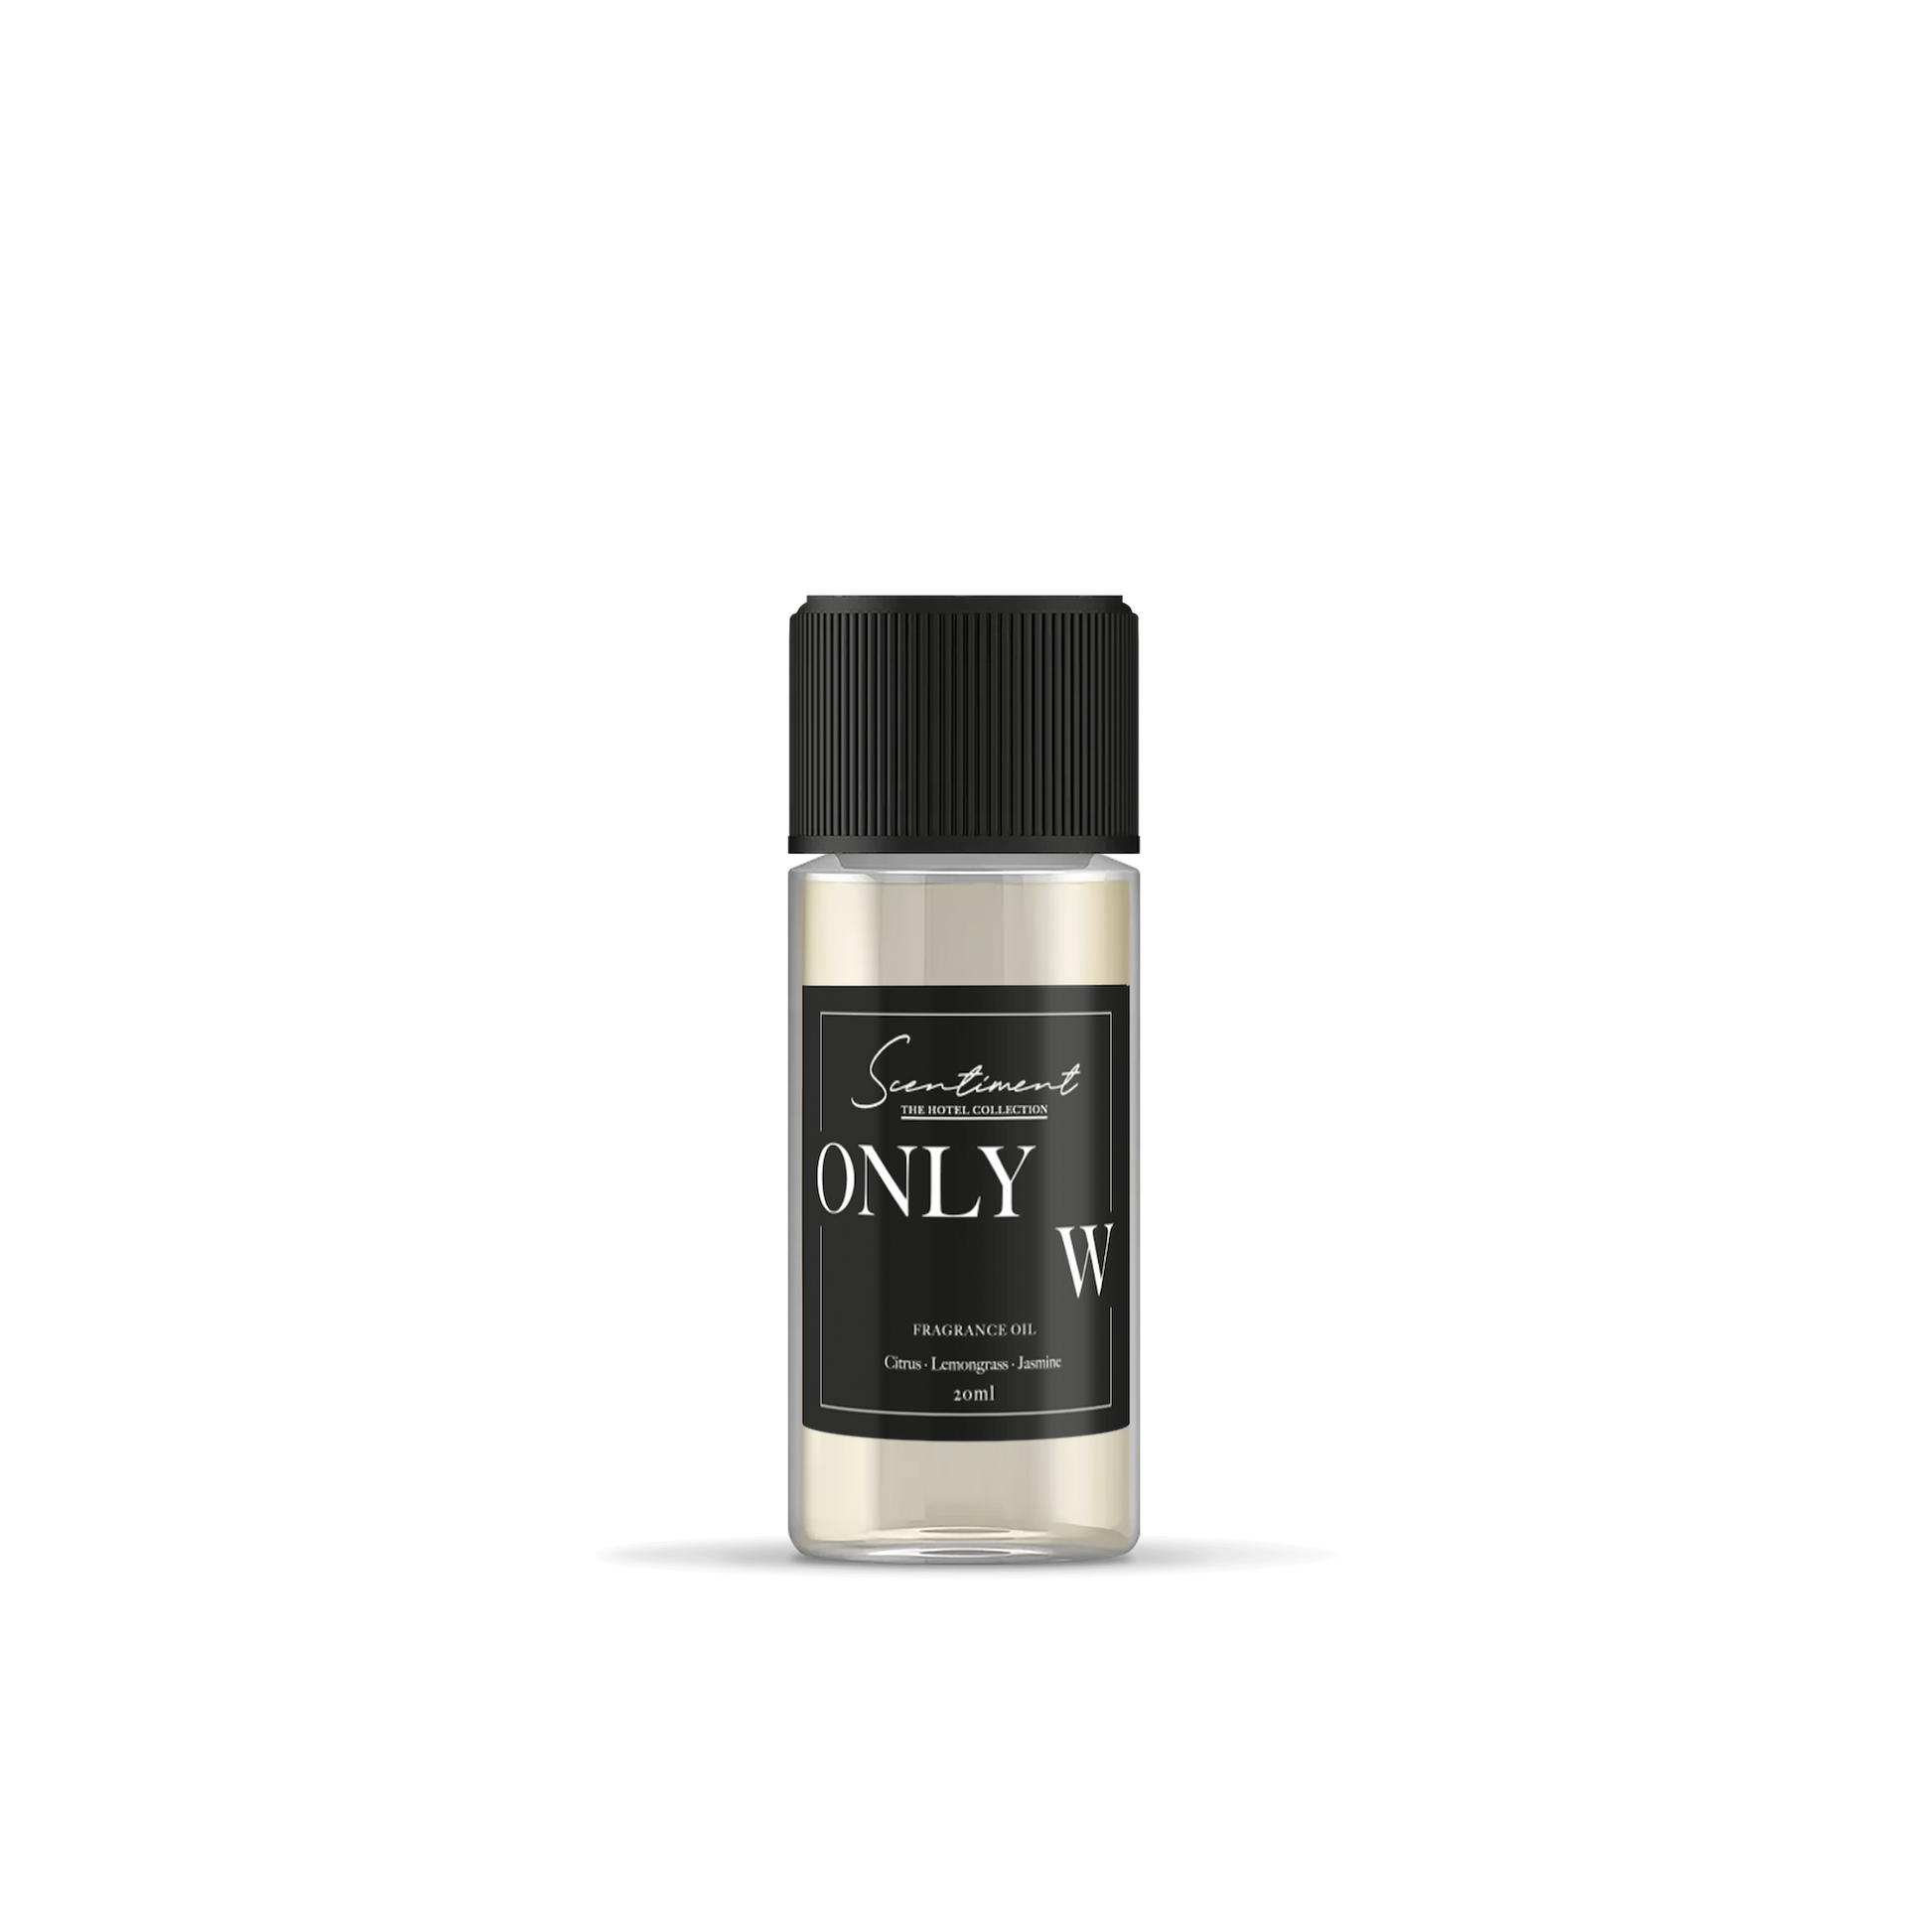 Only W Fragrance Oil, inspired by W Hotels®, with notes of Citrus, Lemongrass, and Jasmine.